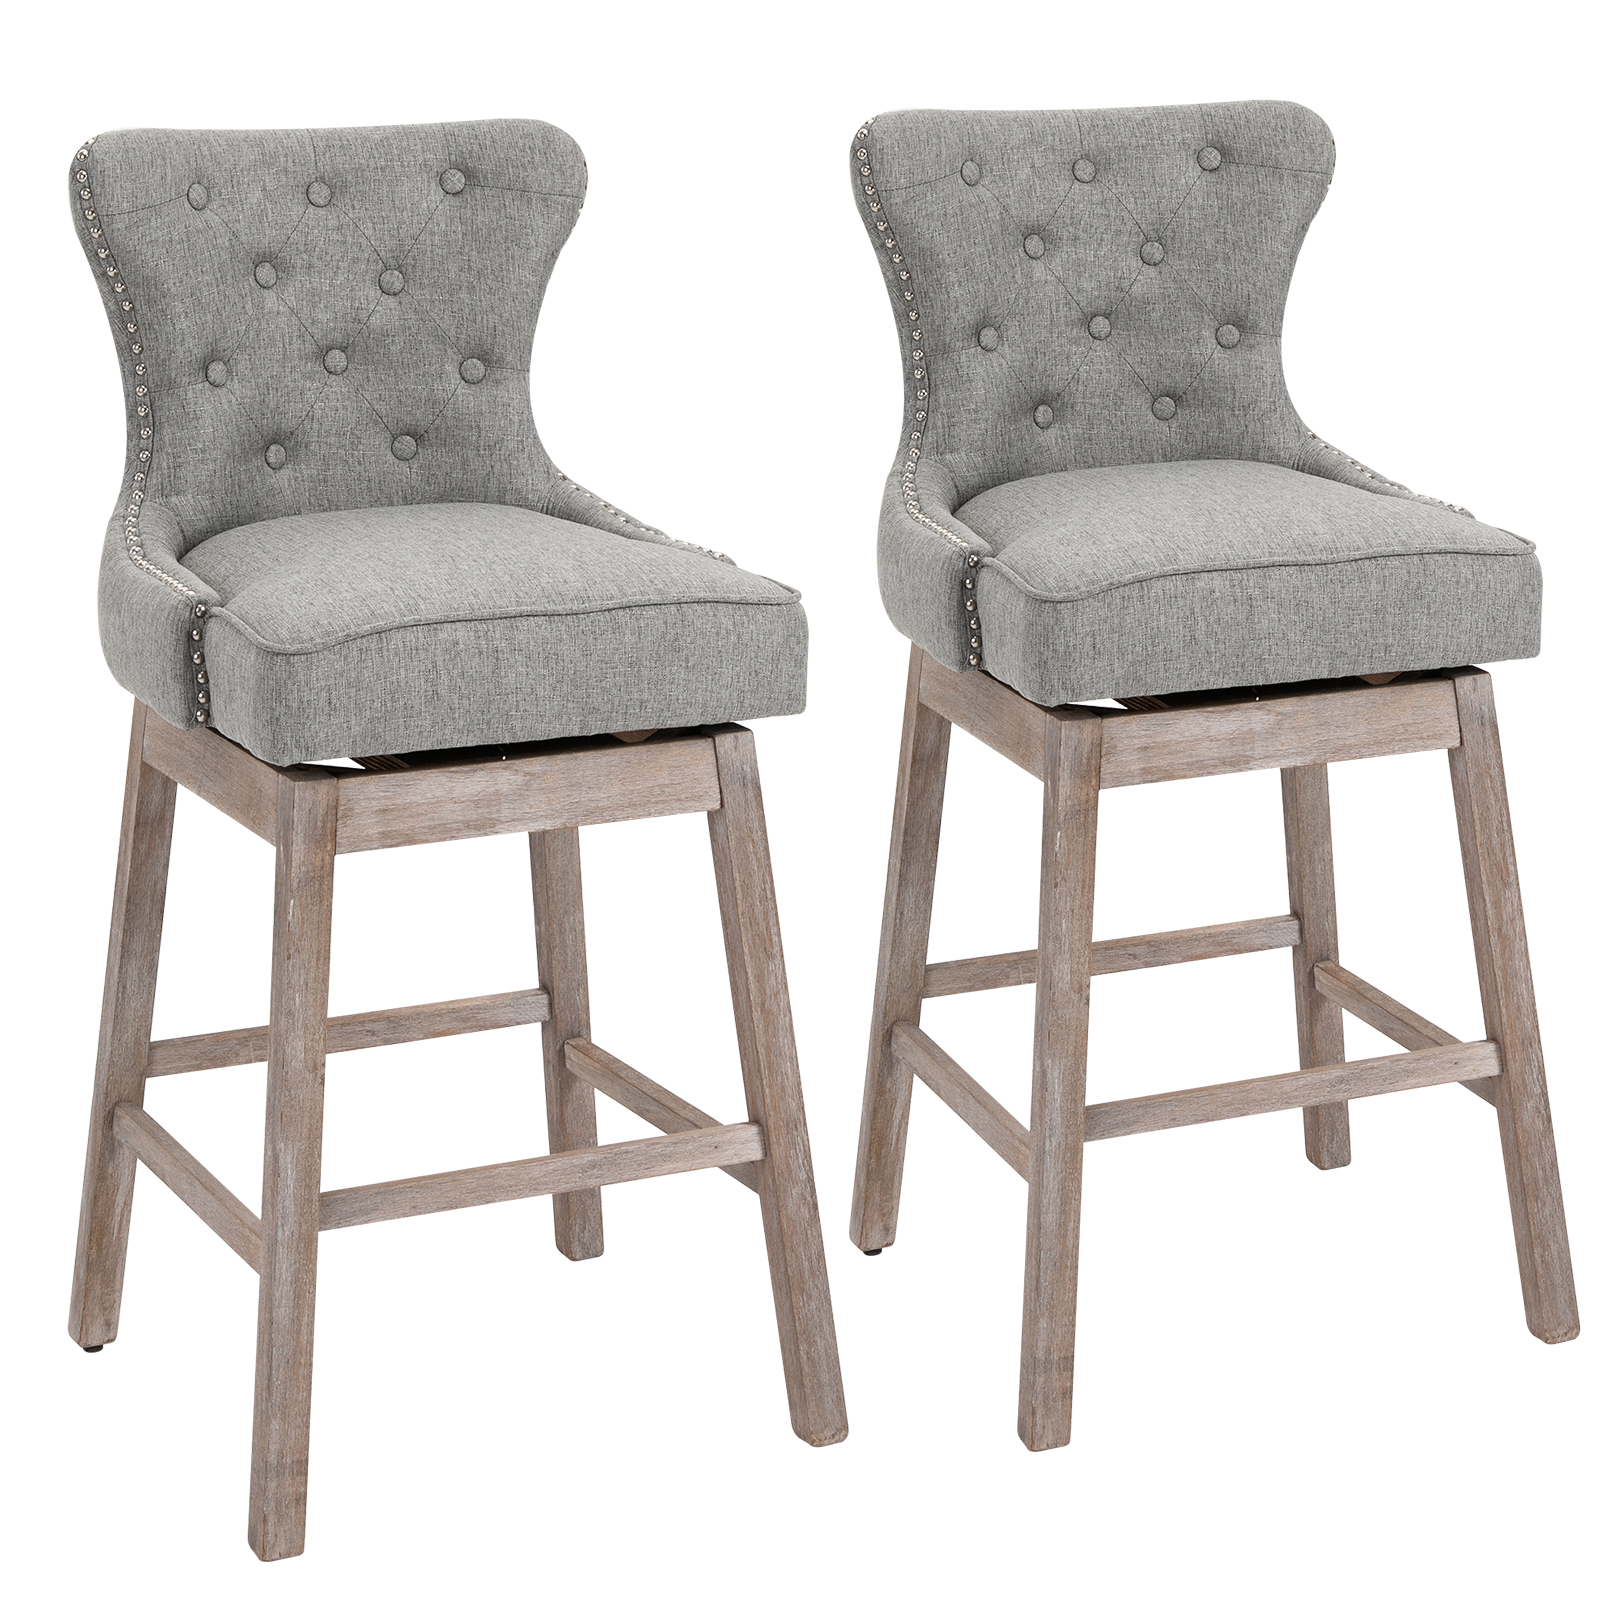 Gray BELLEZE 40 Tufted Wingback Fabric Upholstered Counter Stools Dining Chair Set of 2